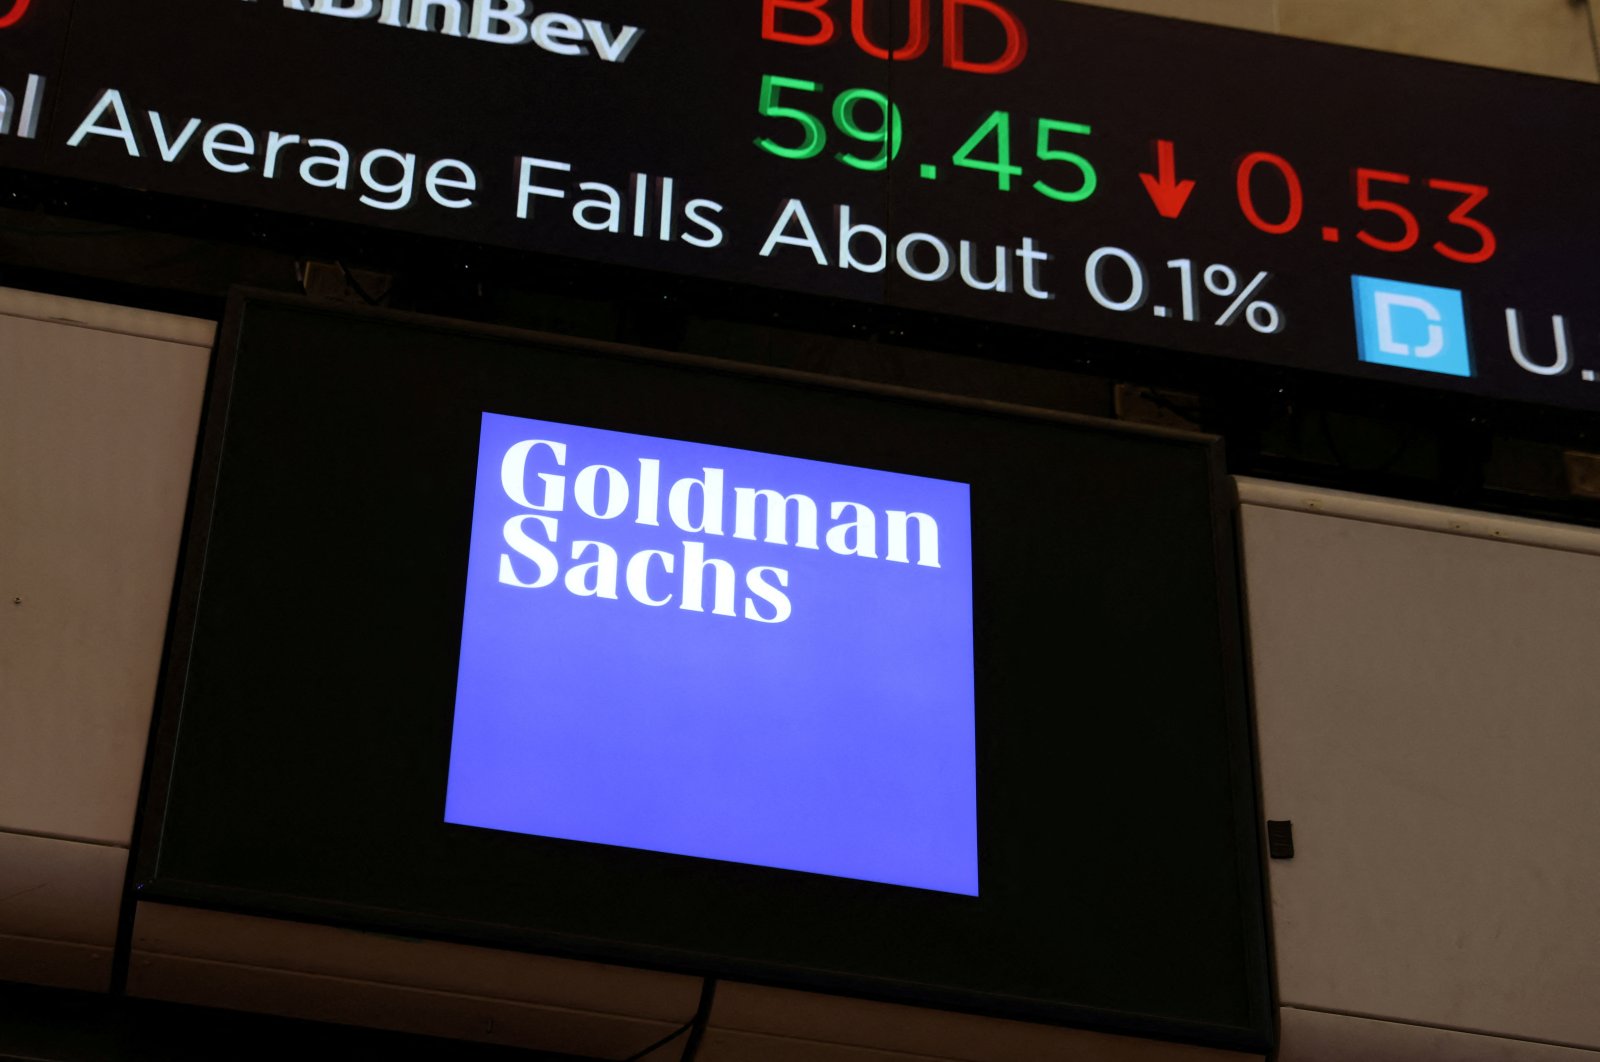 The logo for Goldman Sachs is seen on the trading floor at the New York Stock Exchange (NYSE), New York, U.S., Nov. 17, 2021. (Reuters Photo)